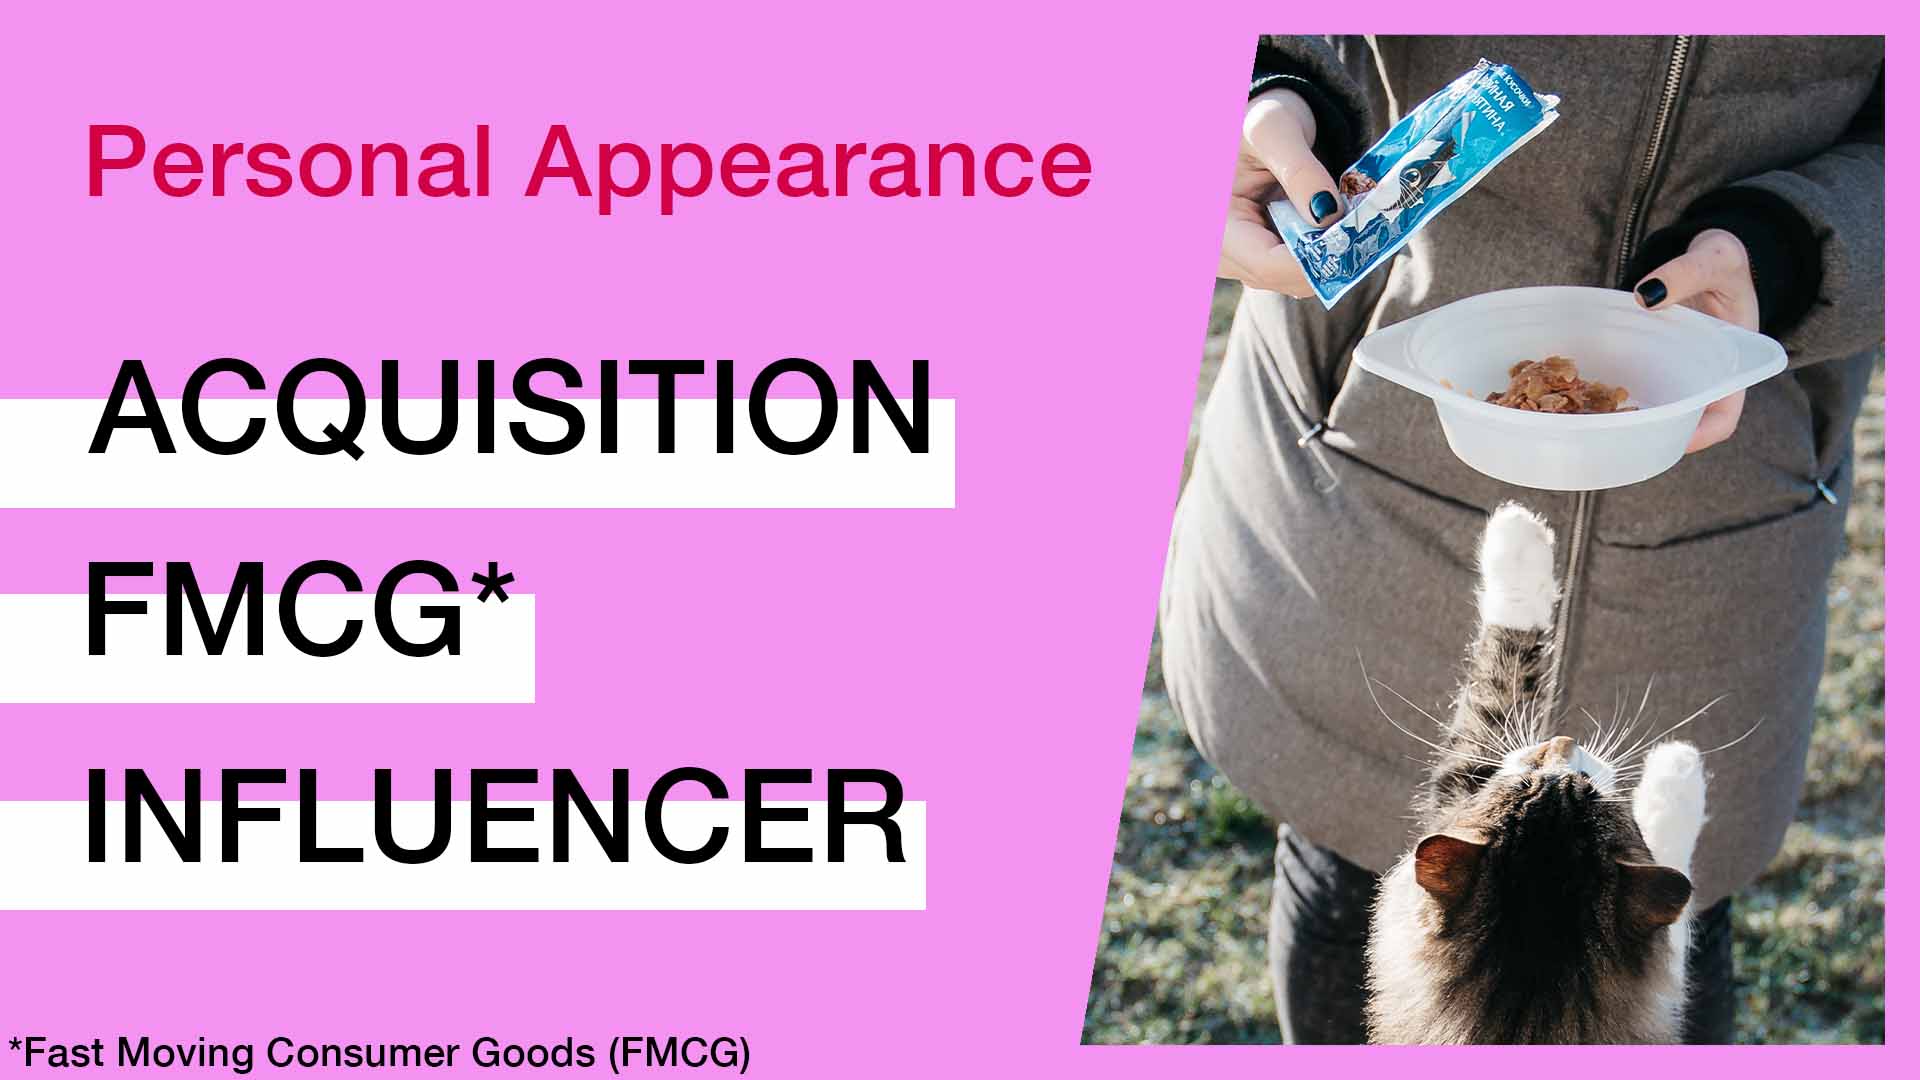 FMCG Influencer Marketing inkl. Personal Appearance